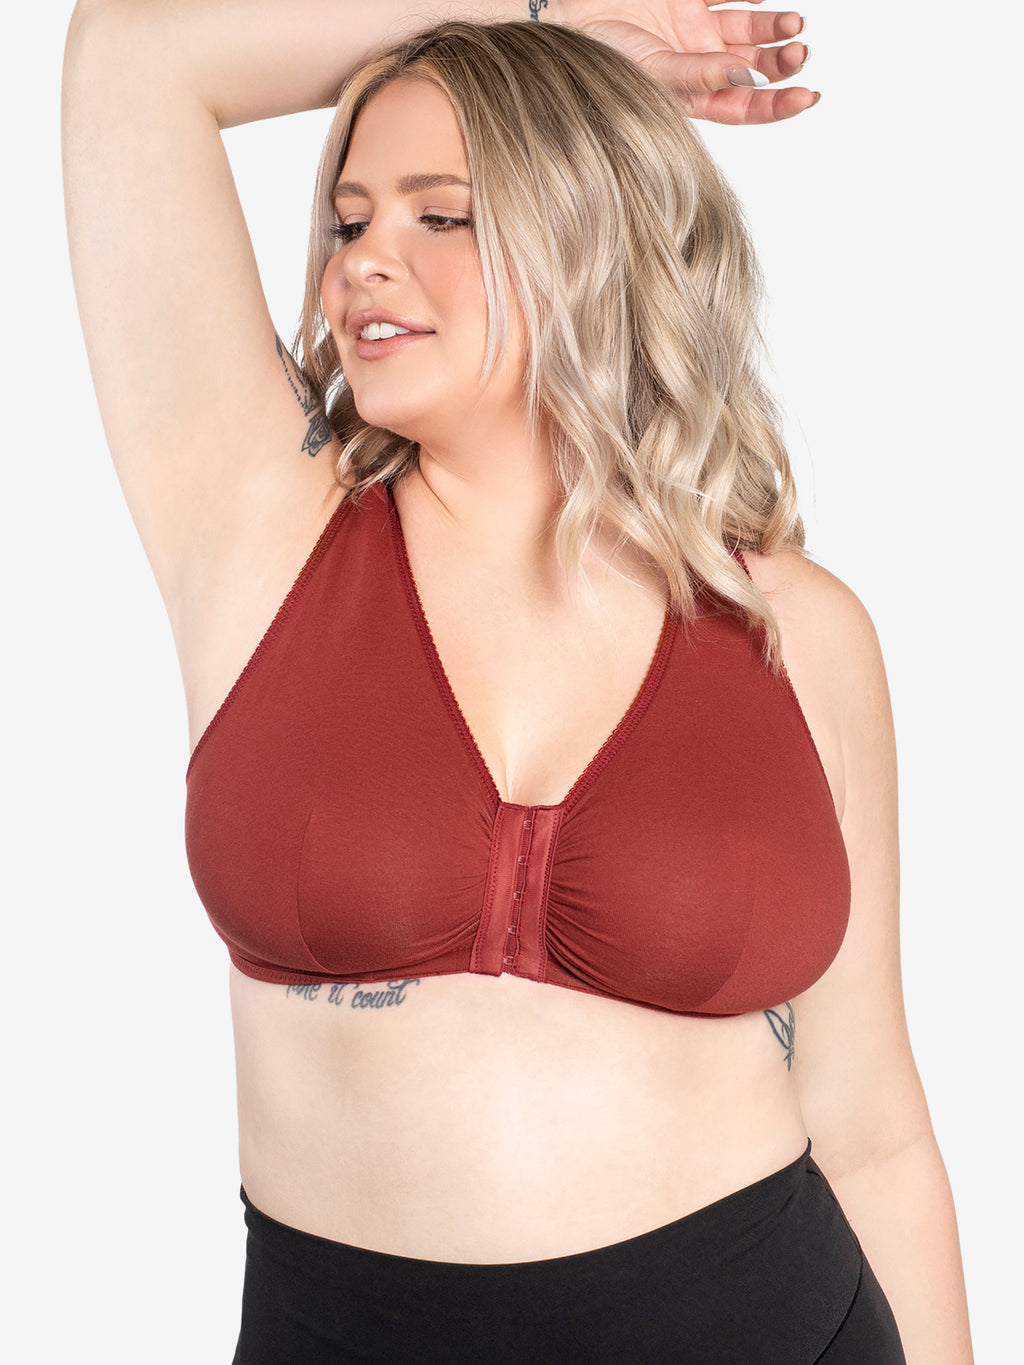 40A/B Bra Size in Spiced Apple by Leading Lady